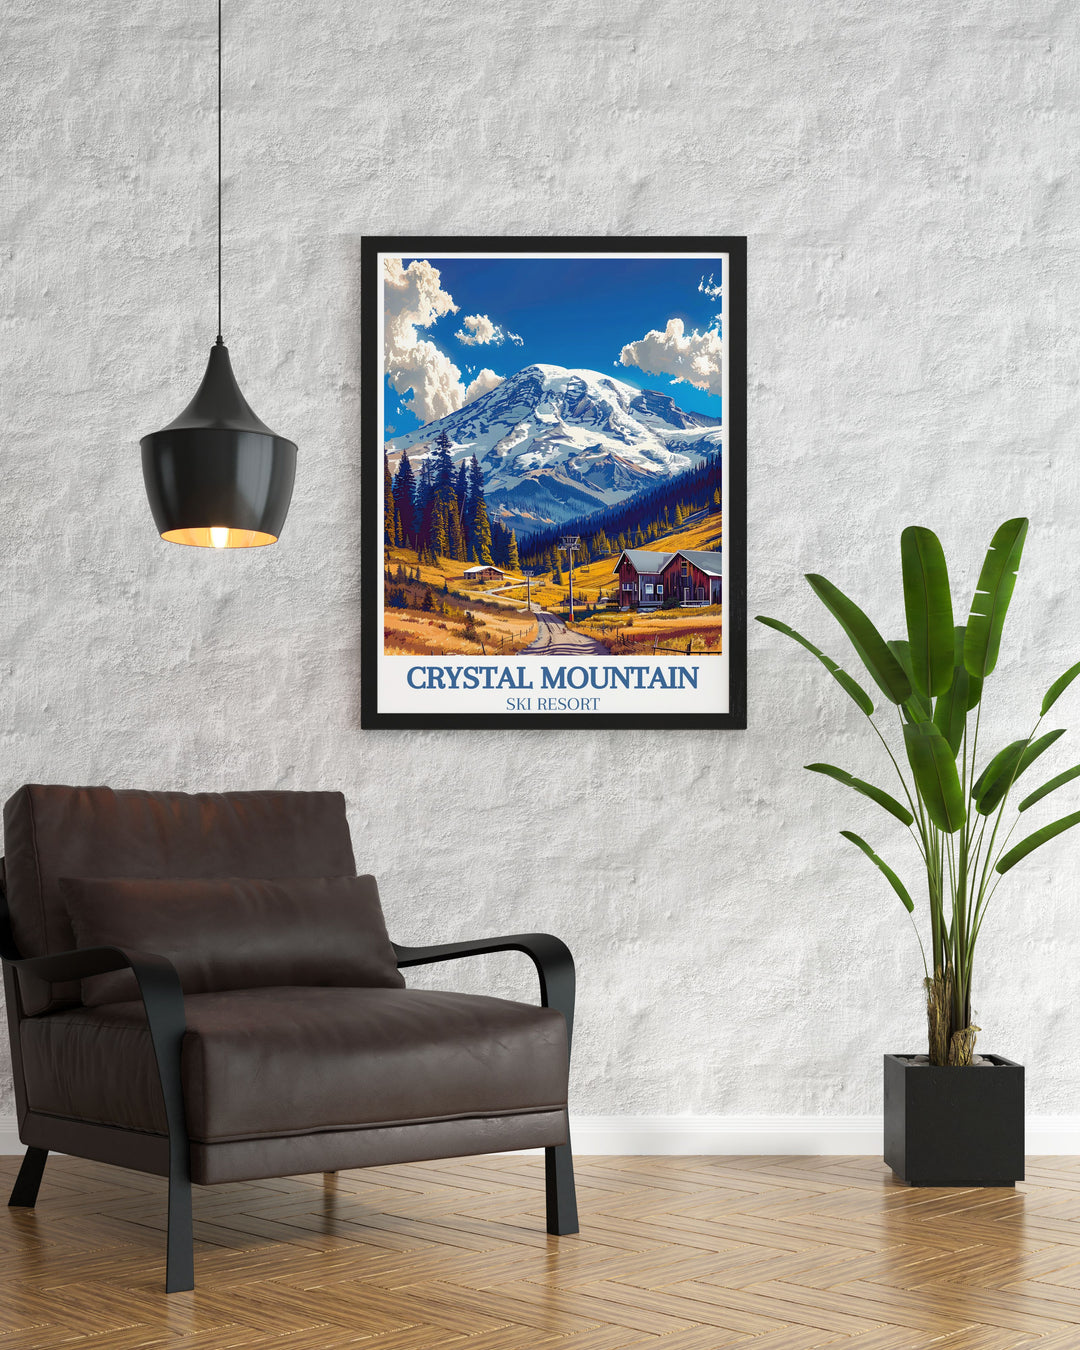 A vintage style print showcasing the picturesque slopes of Crystal Mountain and the stunning views of Mount Rainier, perfect for adding a touch of adventure to your decor.